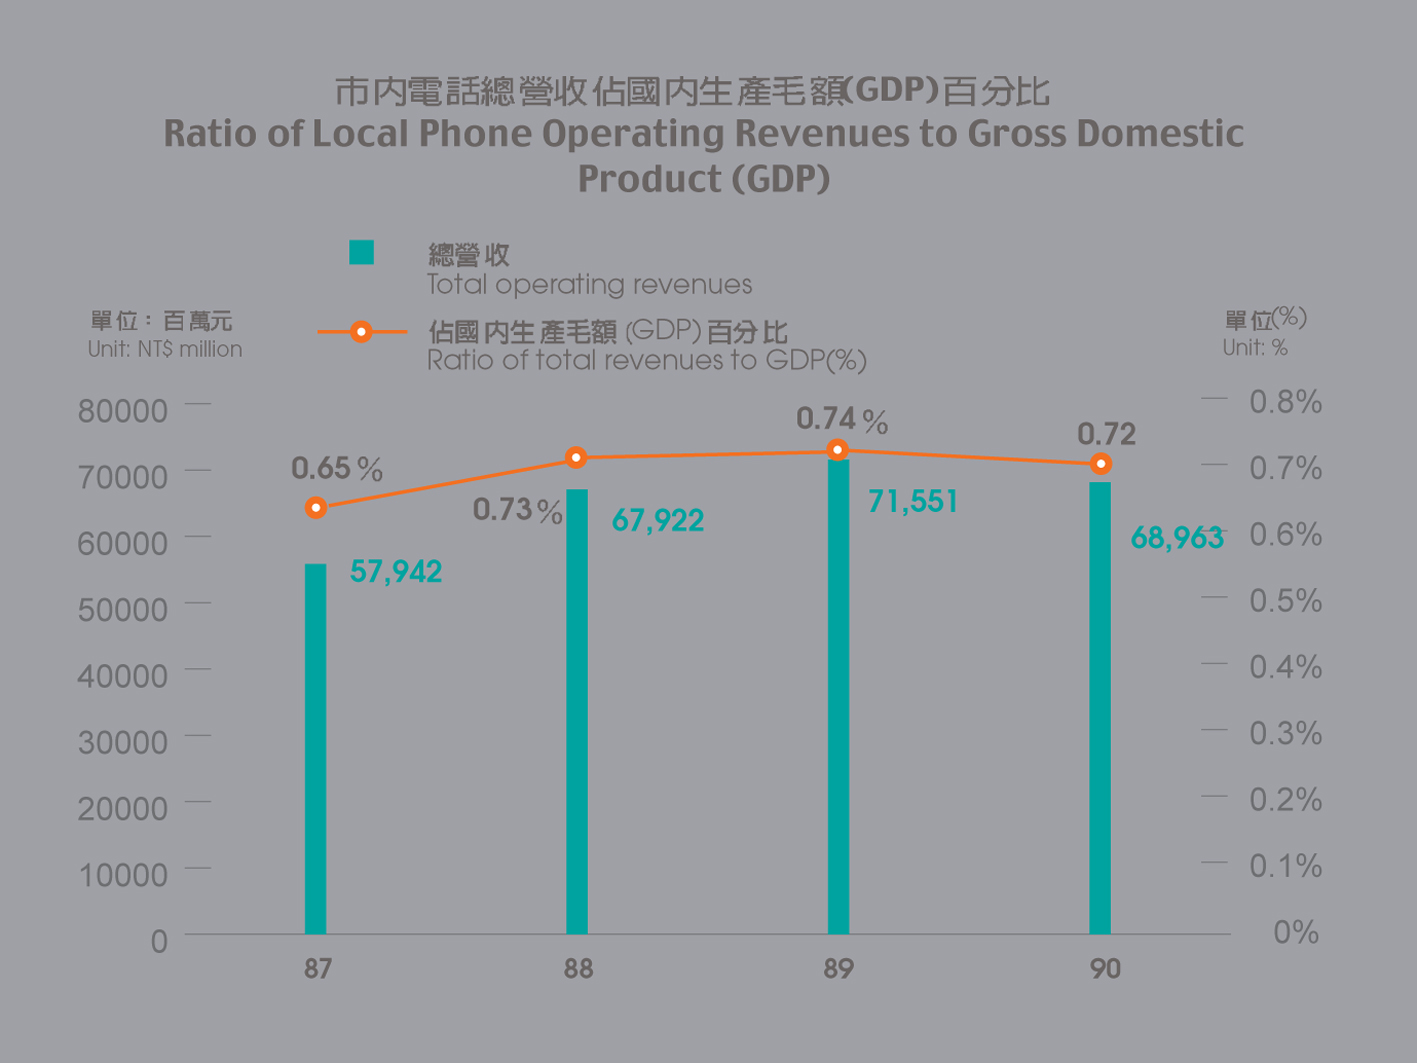 Ratio of Local Phone Operating Revenues to Gross Domestic Product (GDP)